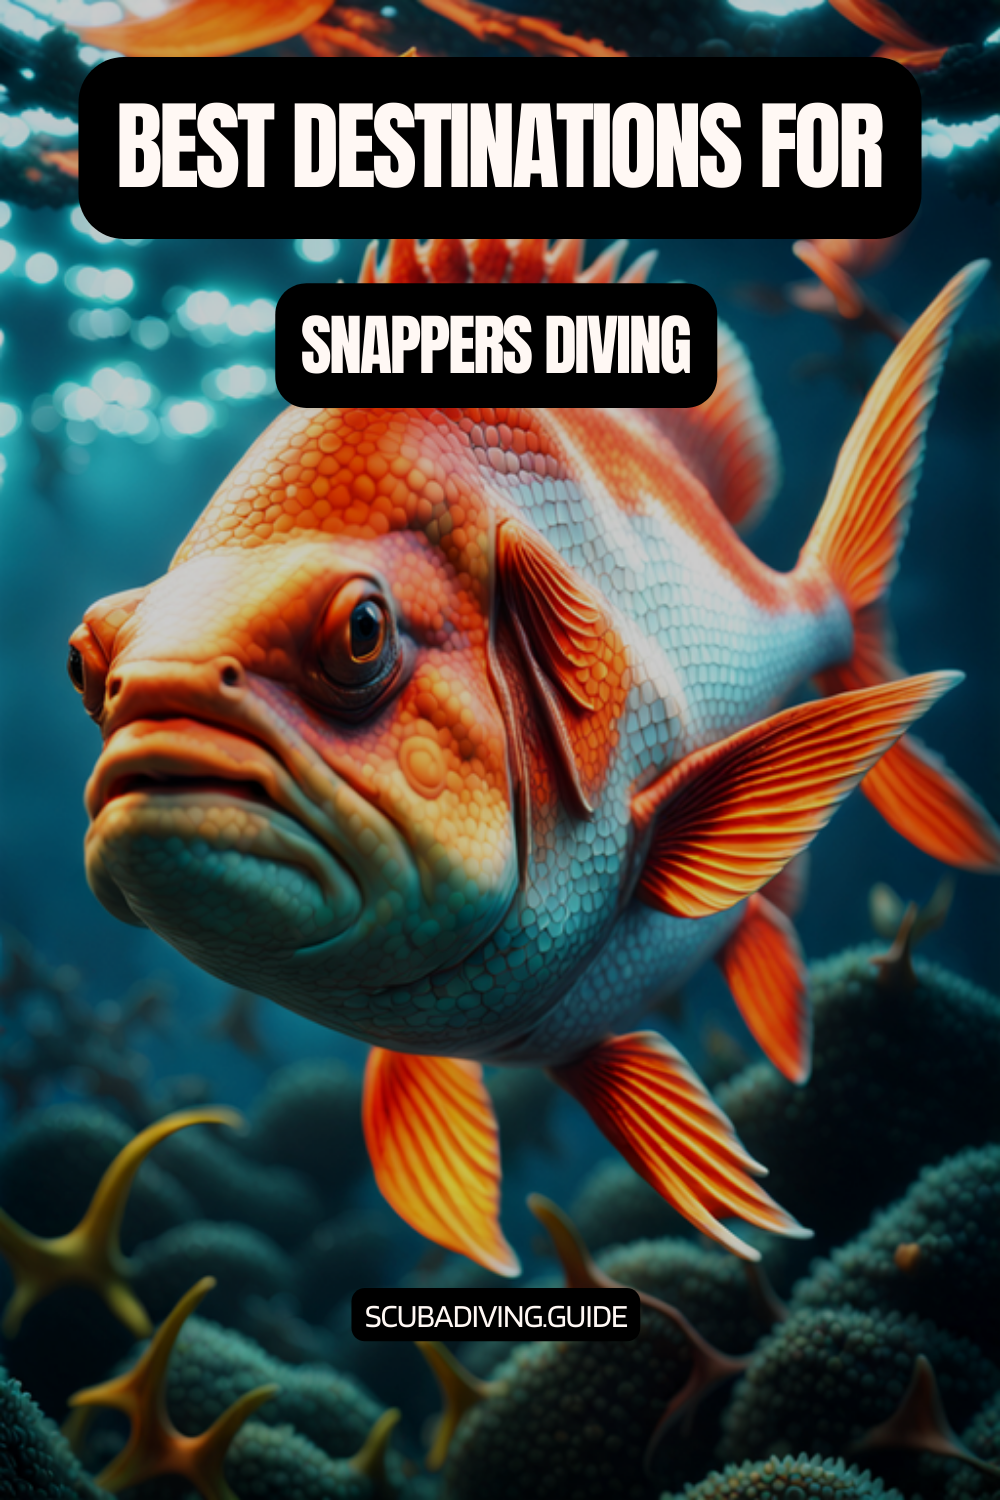 Best Destinations for Diving with Snappers